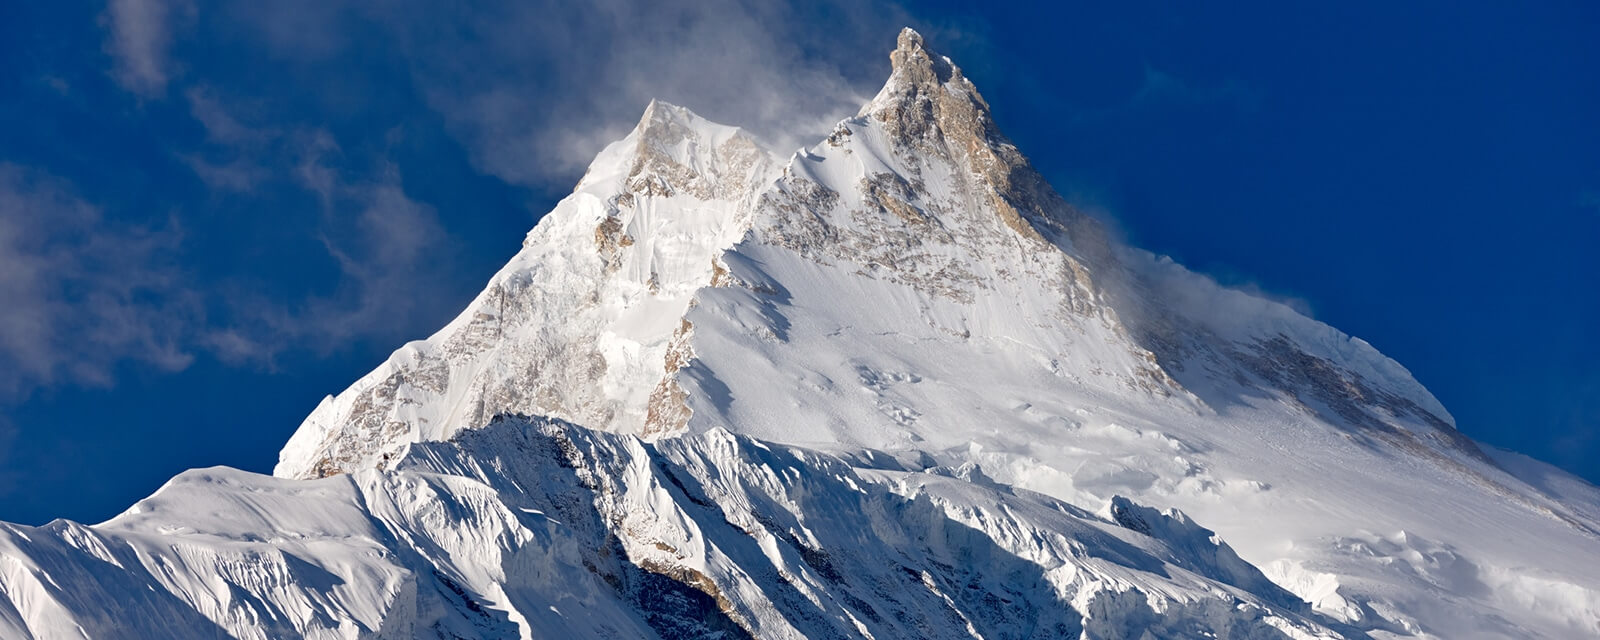 Manaslu is a large, snow covered peak in the Himalaya. It is the eight tallest mountain in the world. 